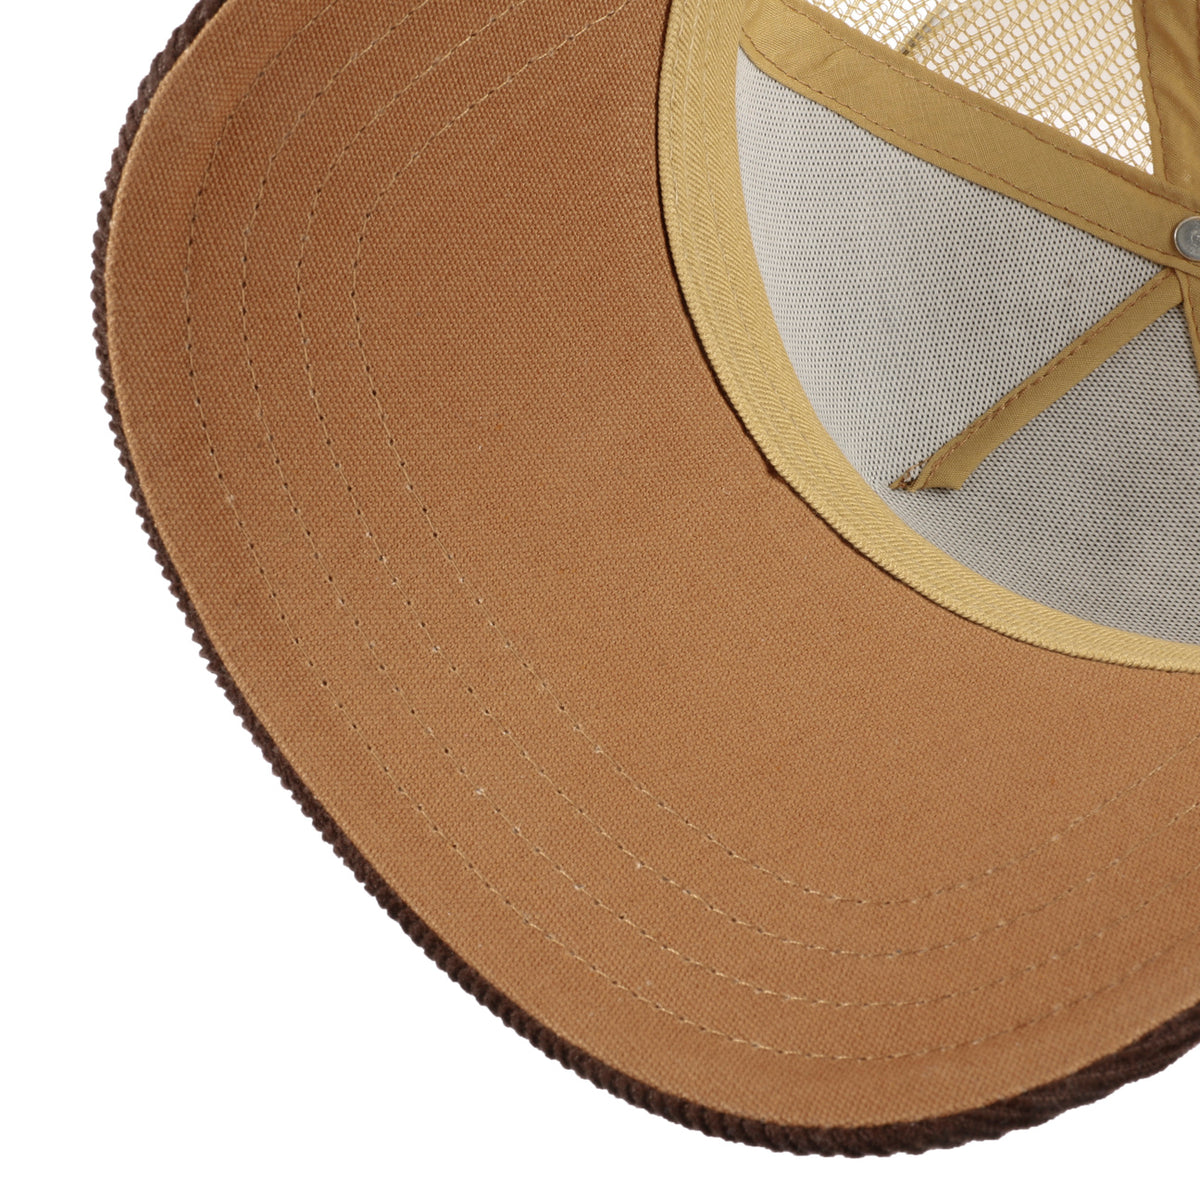 Stetson By The Campfire Trucker Cap (7751186)